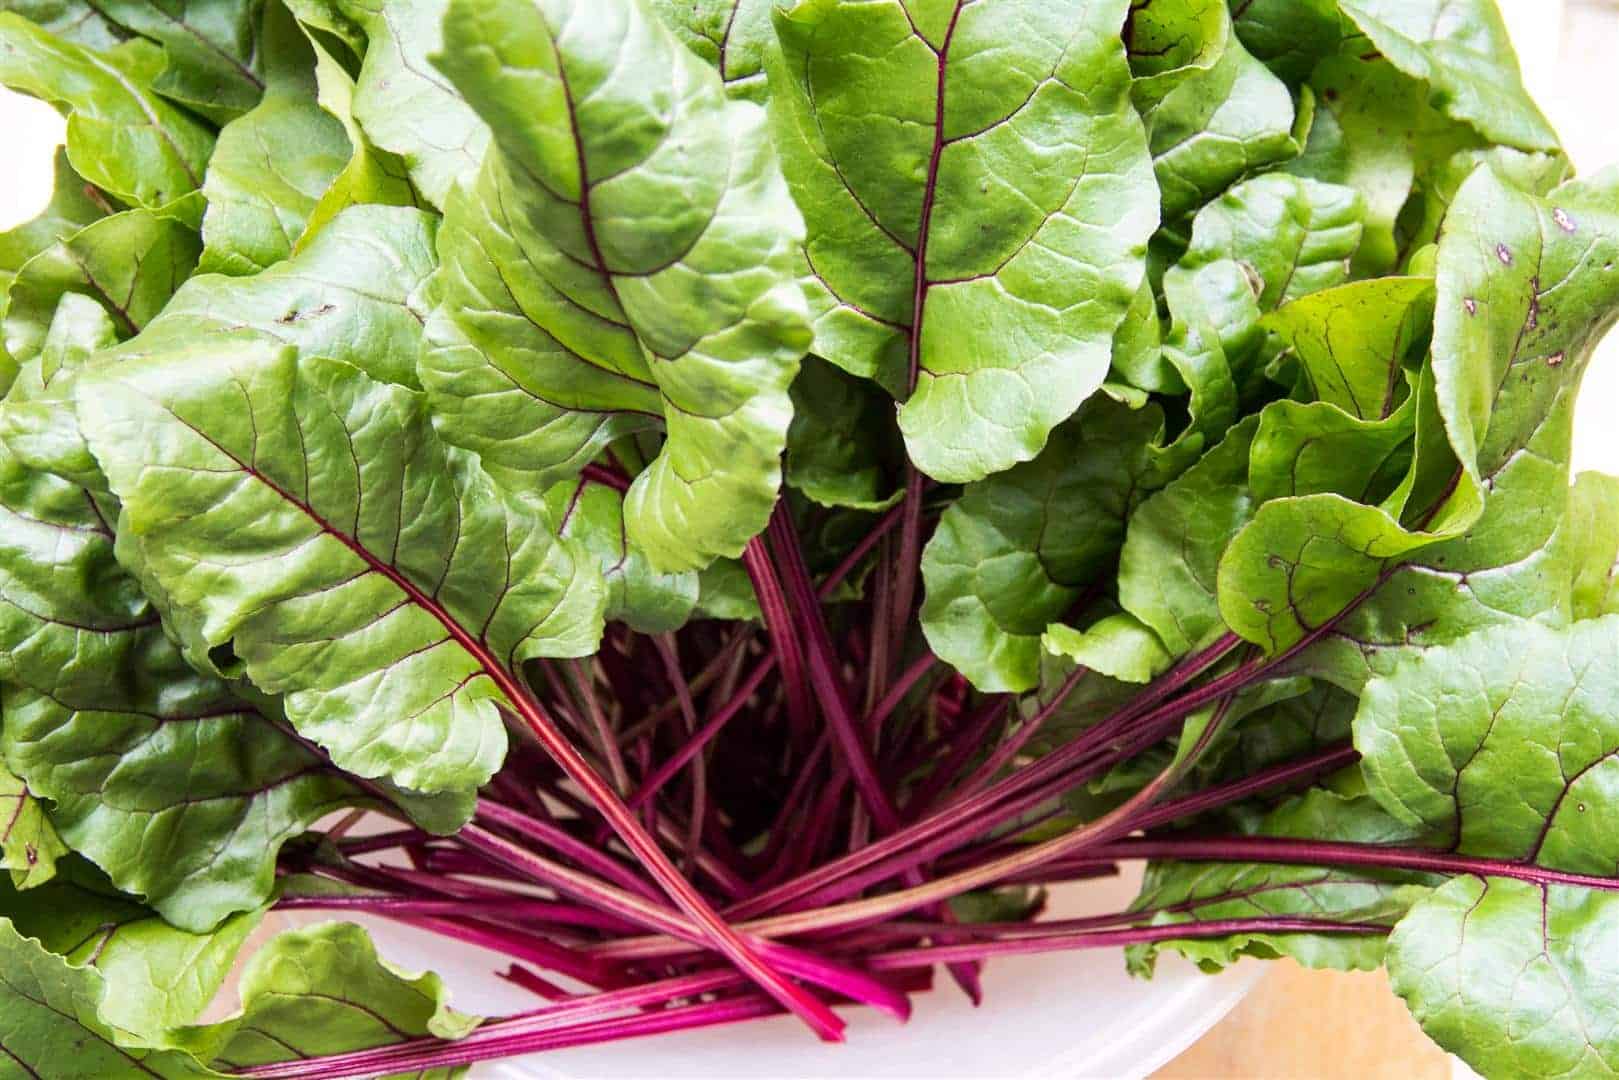 A photo of fresh beetroot leaves, also known as beet greens, arranged in a pile with some of the stems still attached. The leaves have a bright green color and a slightly wrinkled texture, and are presented on a wooden surface